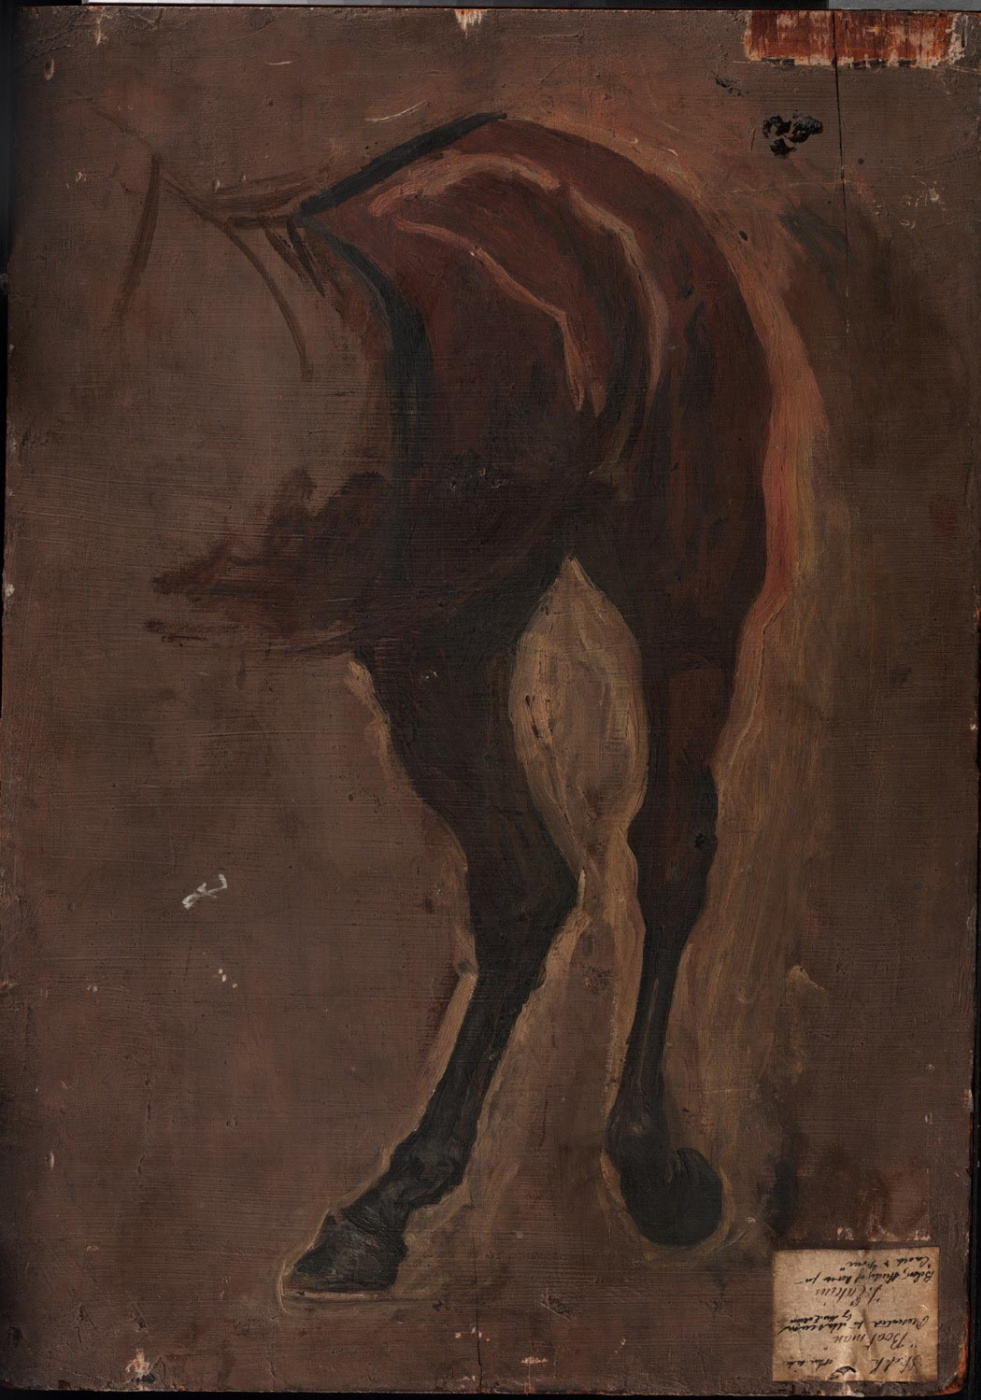 Thomas Eakins. A sketch of the horse